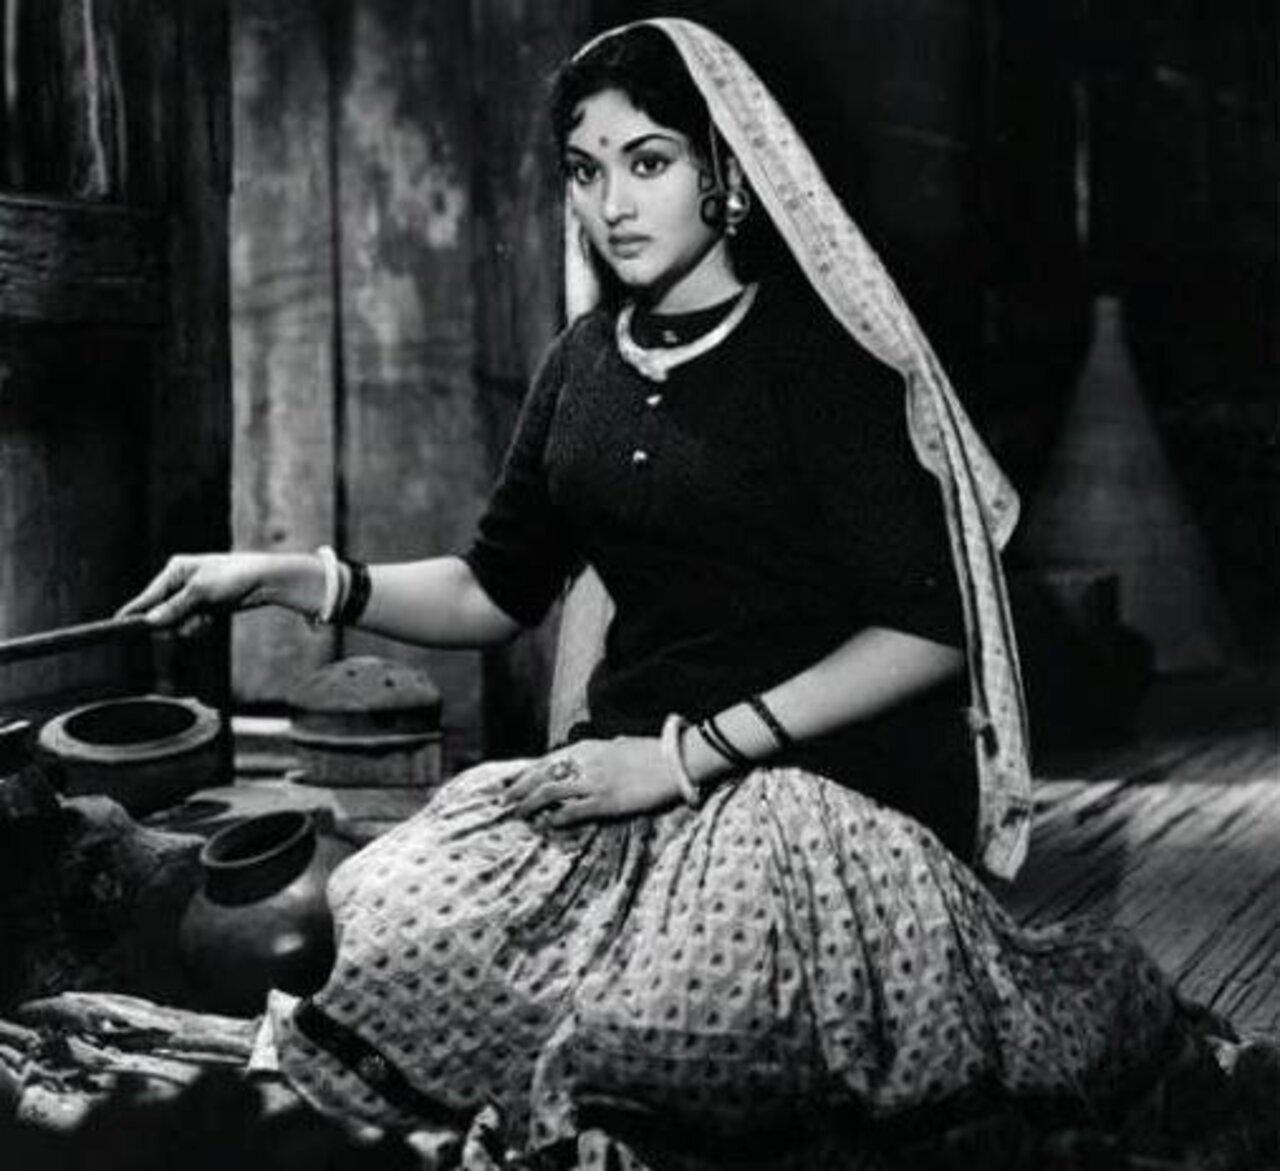 Vyjayanthimala in ‘Madhumati’ and ‘Naya Daur’
Vyjayanthimala, through her roles in films like ‘Madhumati’ and ‘Naya Daur,’ masterfully portrayed the essence of rural India. With her earthy avatar, she not only presented a slice of the countryside but also seamlessly brought its rich traditions and raw beauty into the limelight, making it a focal point in the cinematic landscape of the era